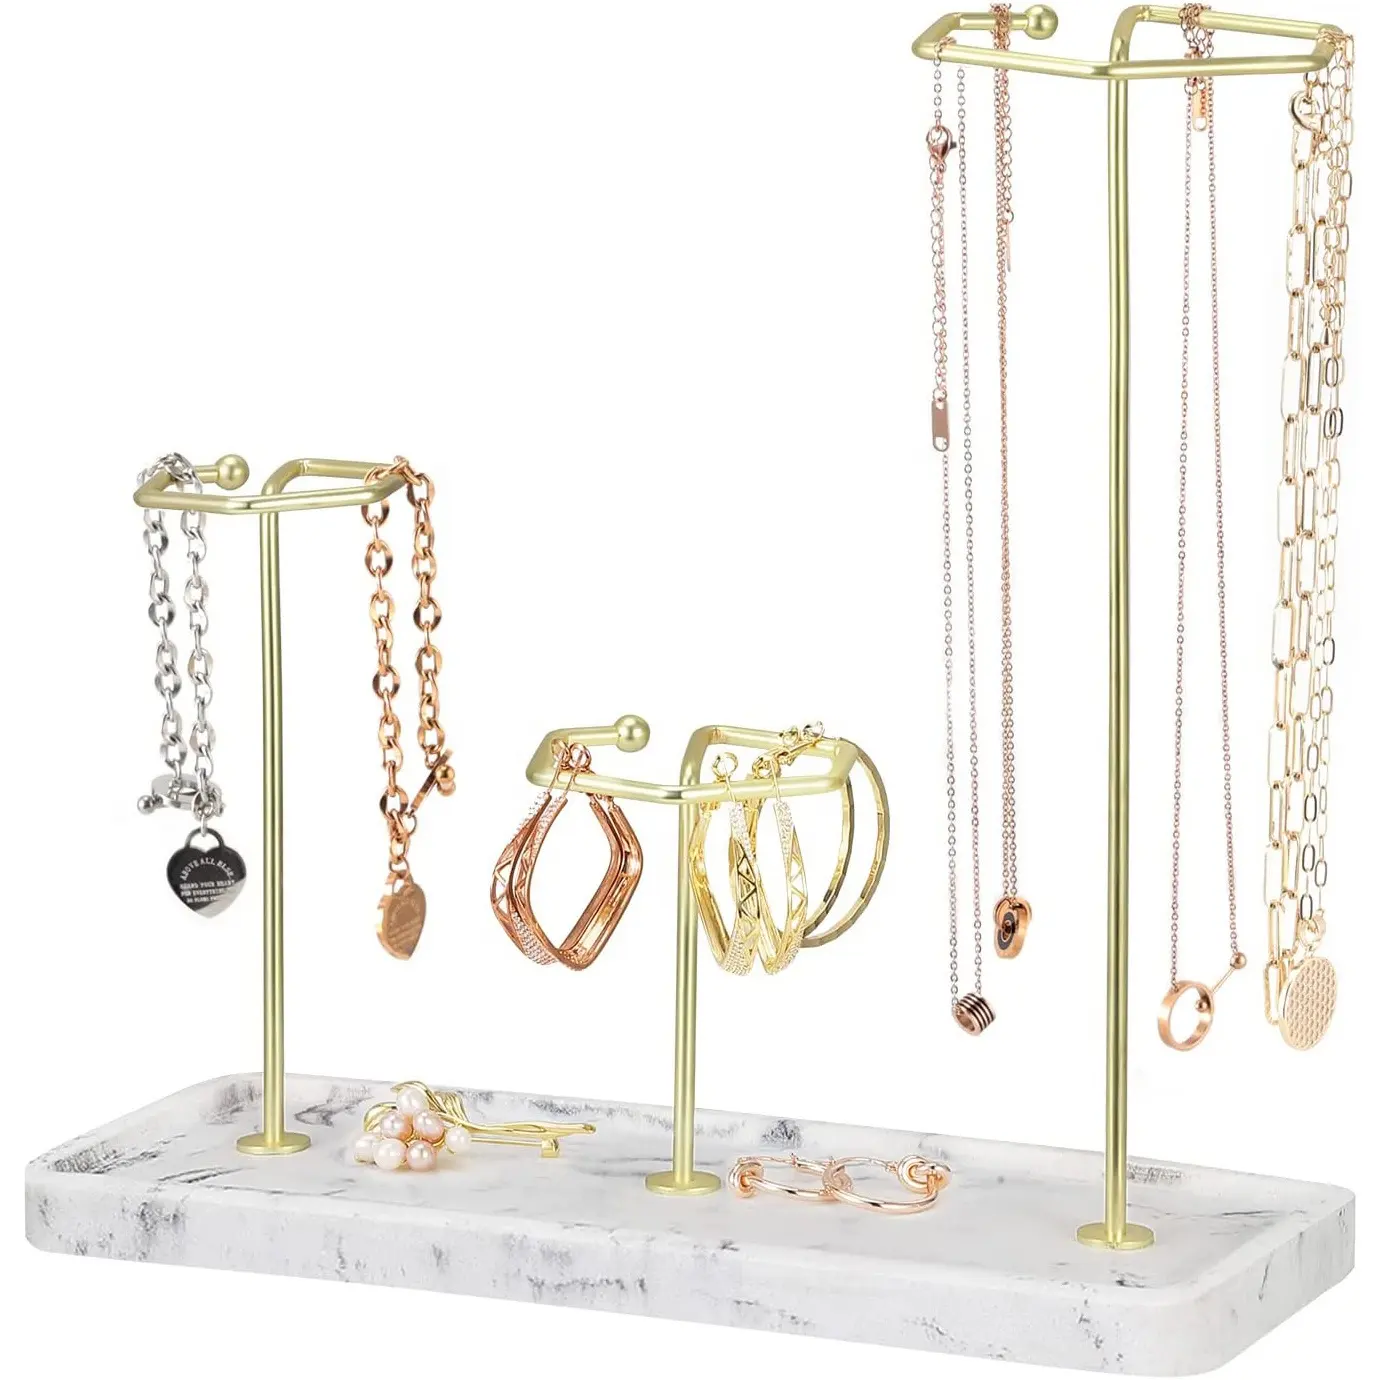 Resin Ring Tray Base Portable Jewelry Stand Sturdy 3 Tier Bracelet Earring Necklace Hanging Display Organizer Necklace Holder